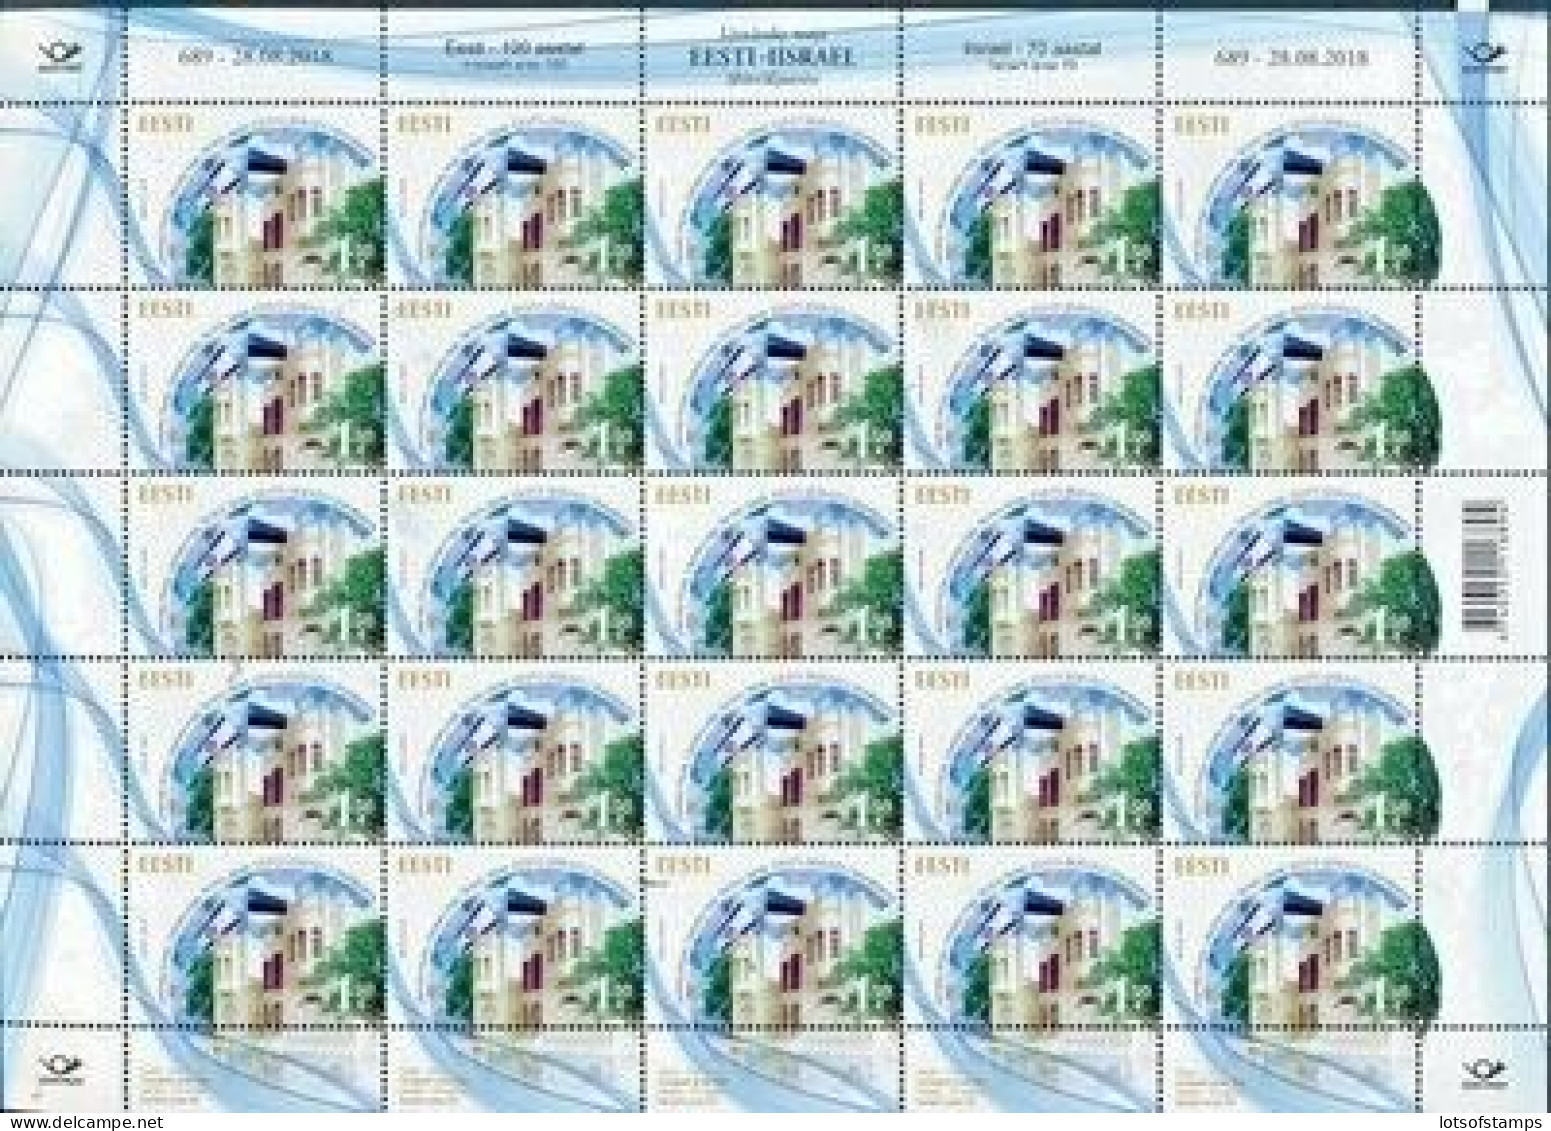 ISRAEL 2018 JOINT ISSUE WITH ESTONIA THE ESTONIA 25 STAMP SHEET MNH - Neufs (avec Tabs)